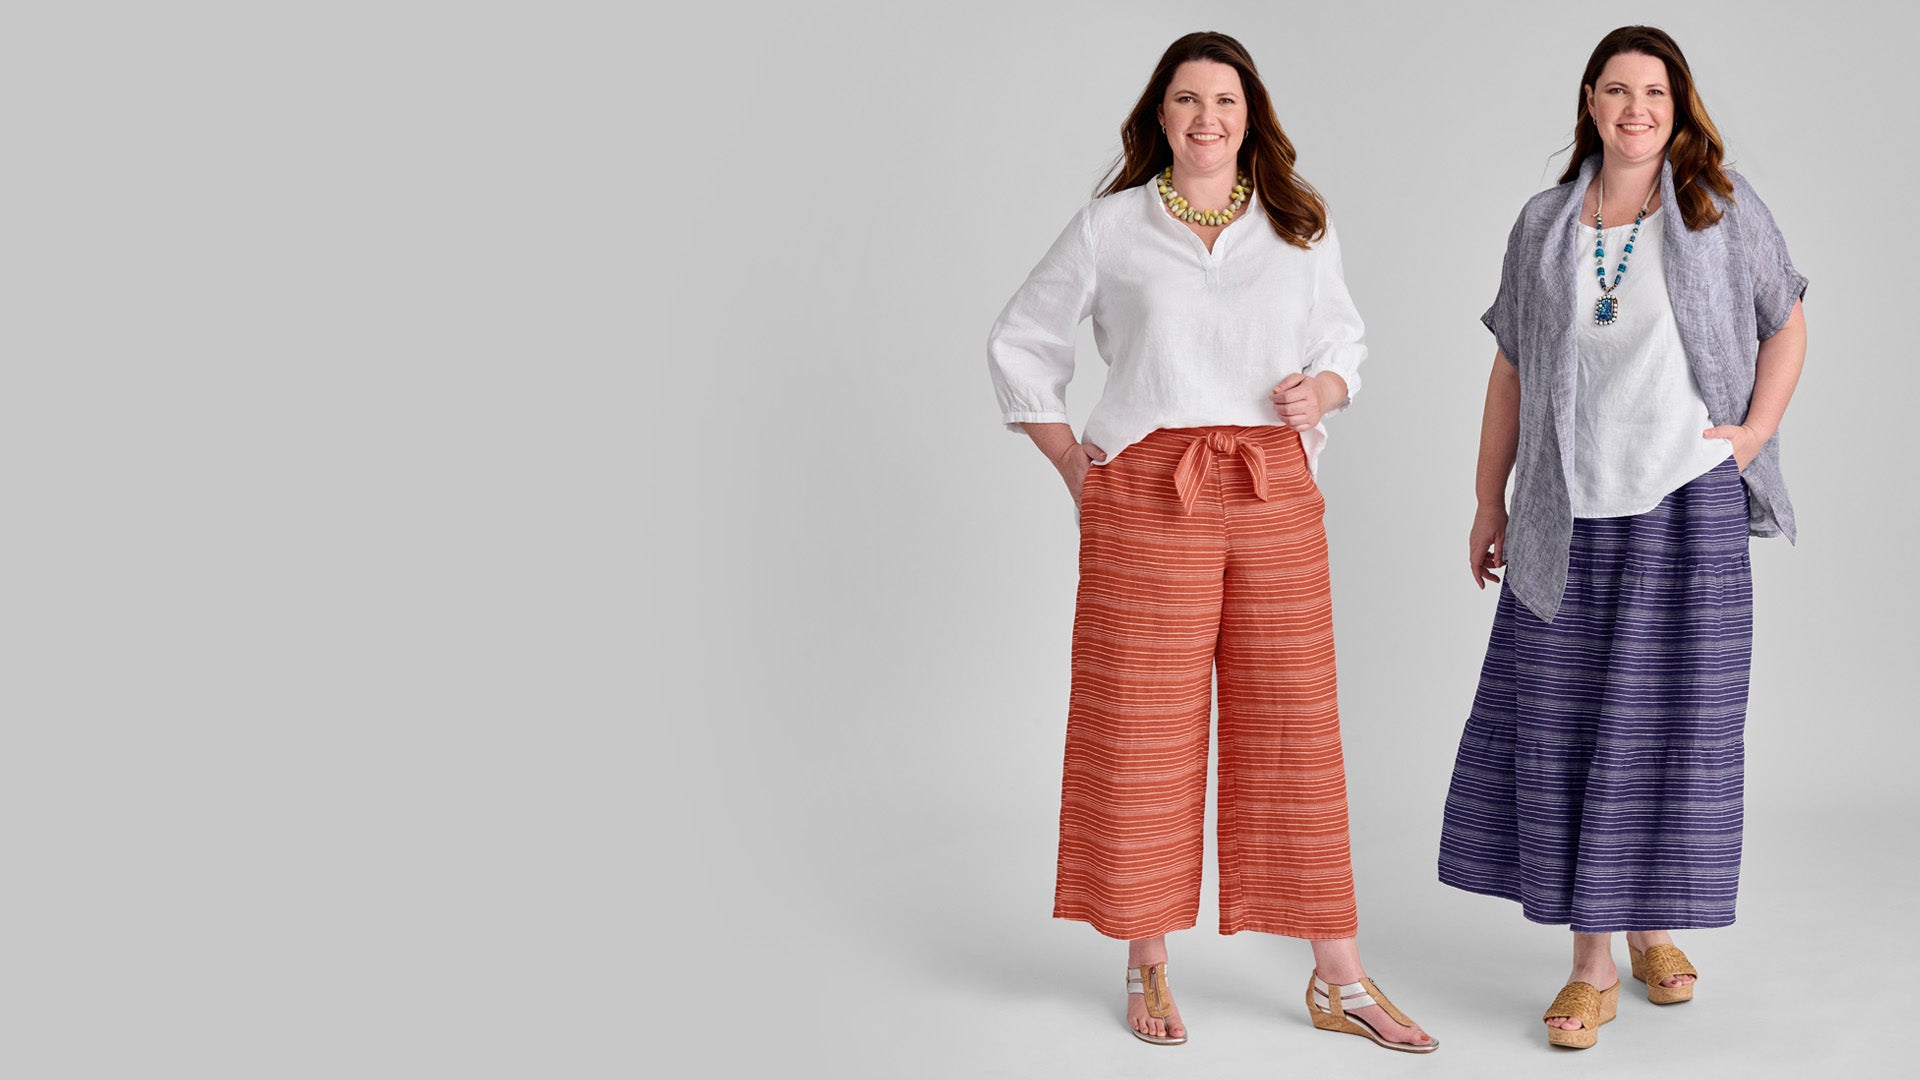 FLAX - women's linen clothing collection Bold